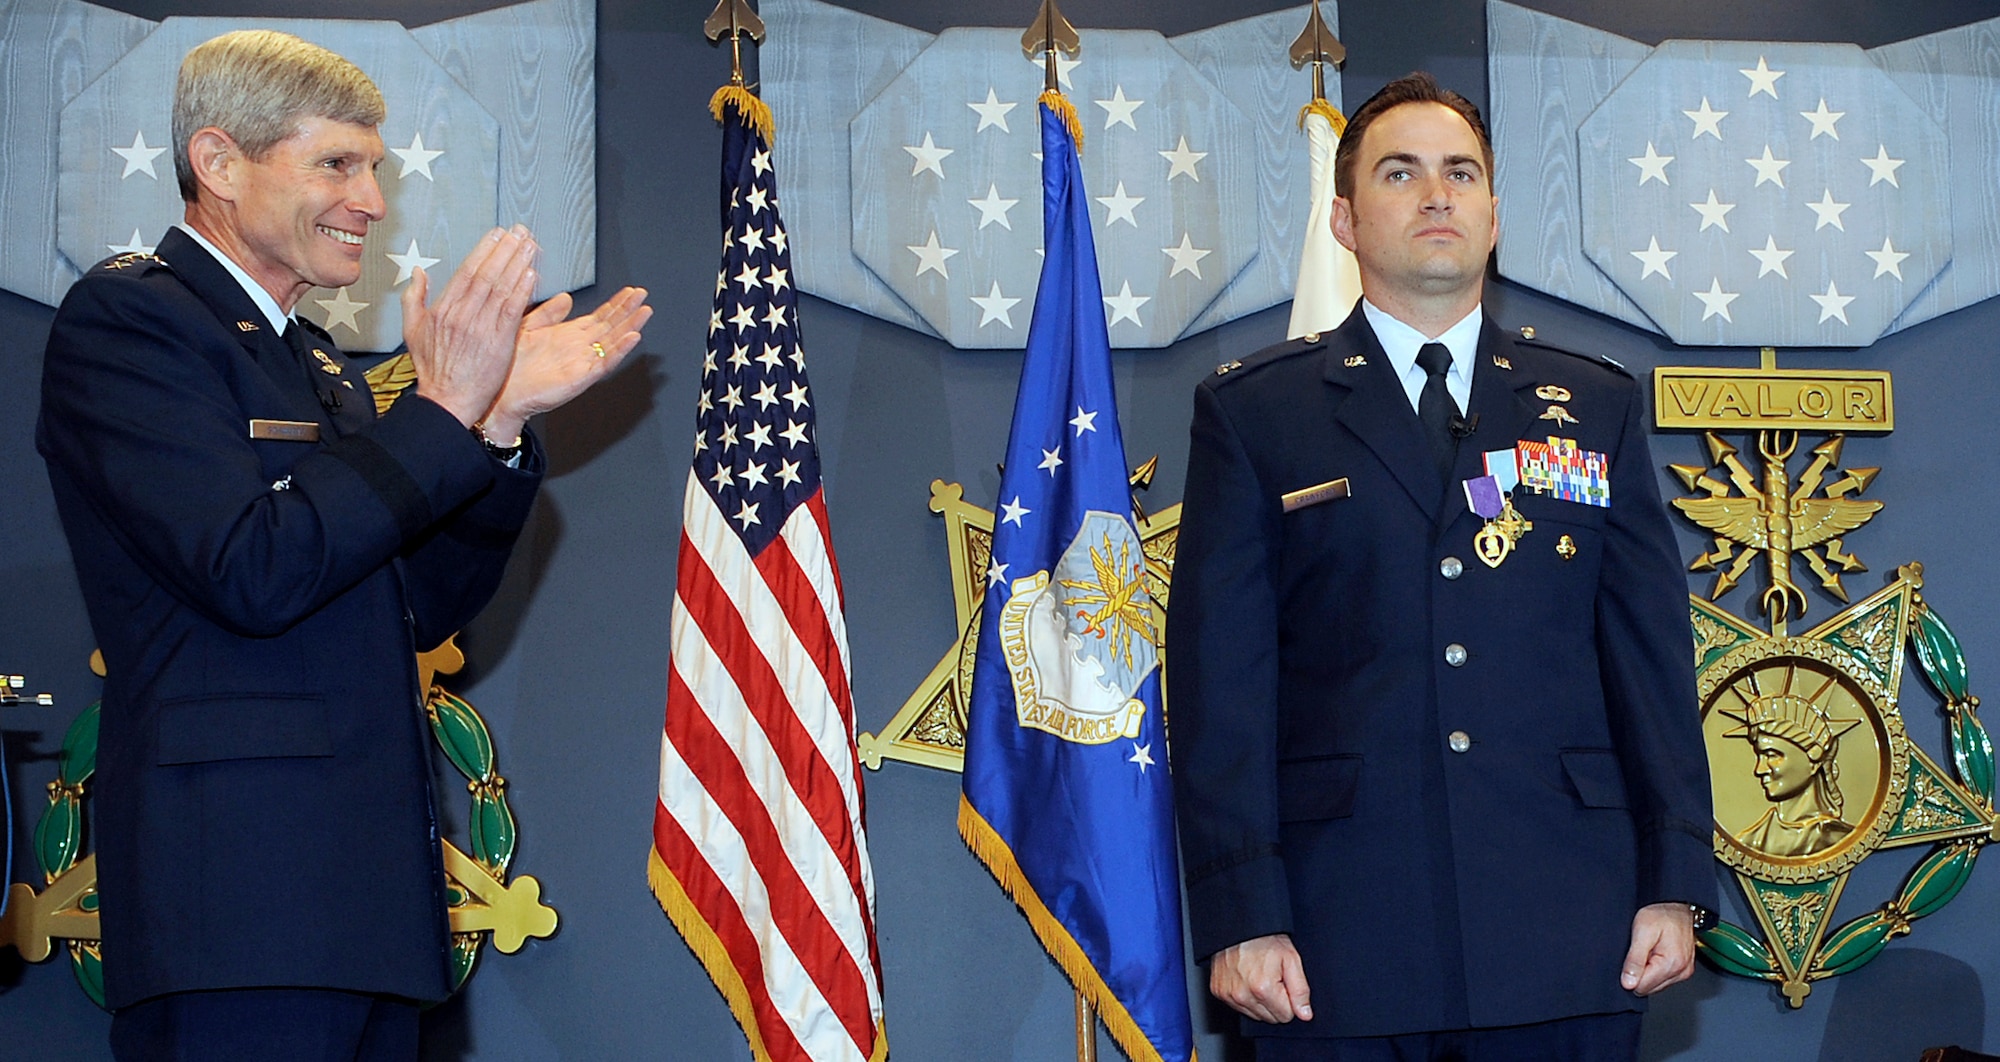 Air Force Chief of Staff Gen. Norton Schwartz congratulates Capt. Barry Crawford after presenting him with the Air Force Cross and Purple Heart during a ceremony in the Pentagon's Hall of Heroes in Washington, D.C., on April 12, 2012.  (U.S. Air Force photo/Andy Morataya)